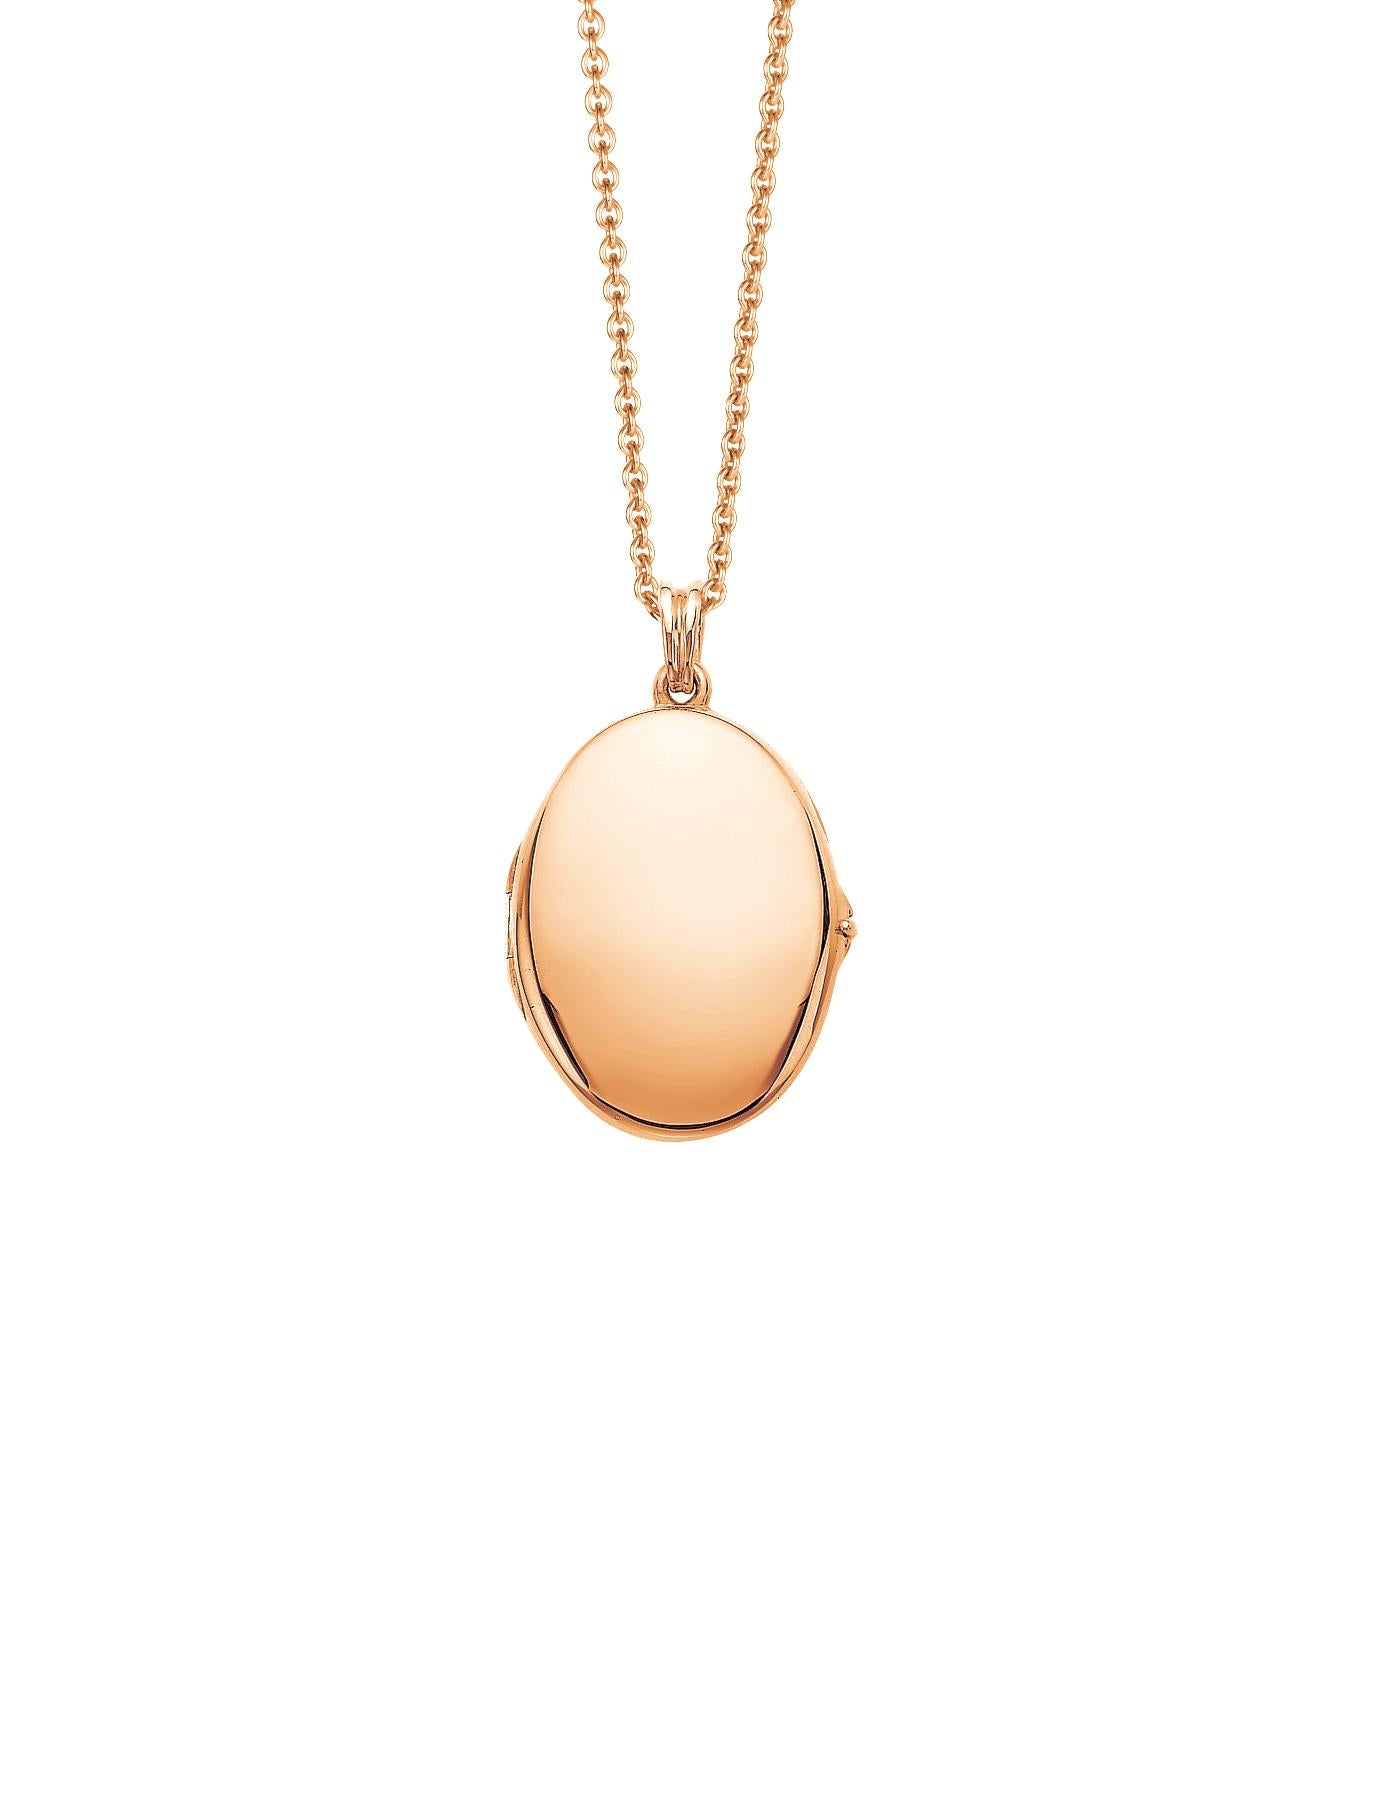 Victor Mayer customizable oval polished pendant locket 18k rose gold, Hallmark collection, measurements app. 23.0 mm x 32.0 mm

About the creator Victor Mayer
Victor Mayer is internationally renowned for elegant timeless designs and unrivalled